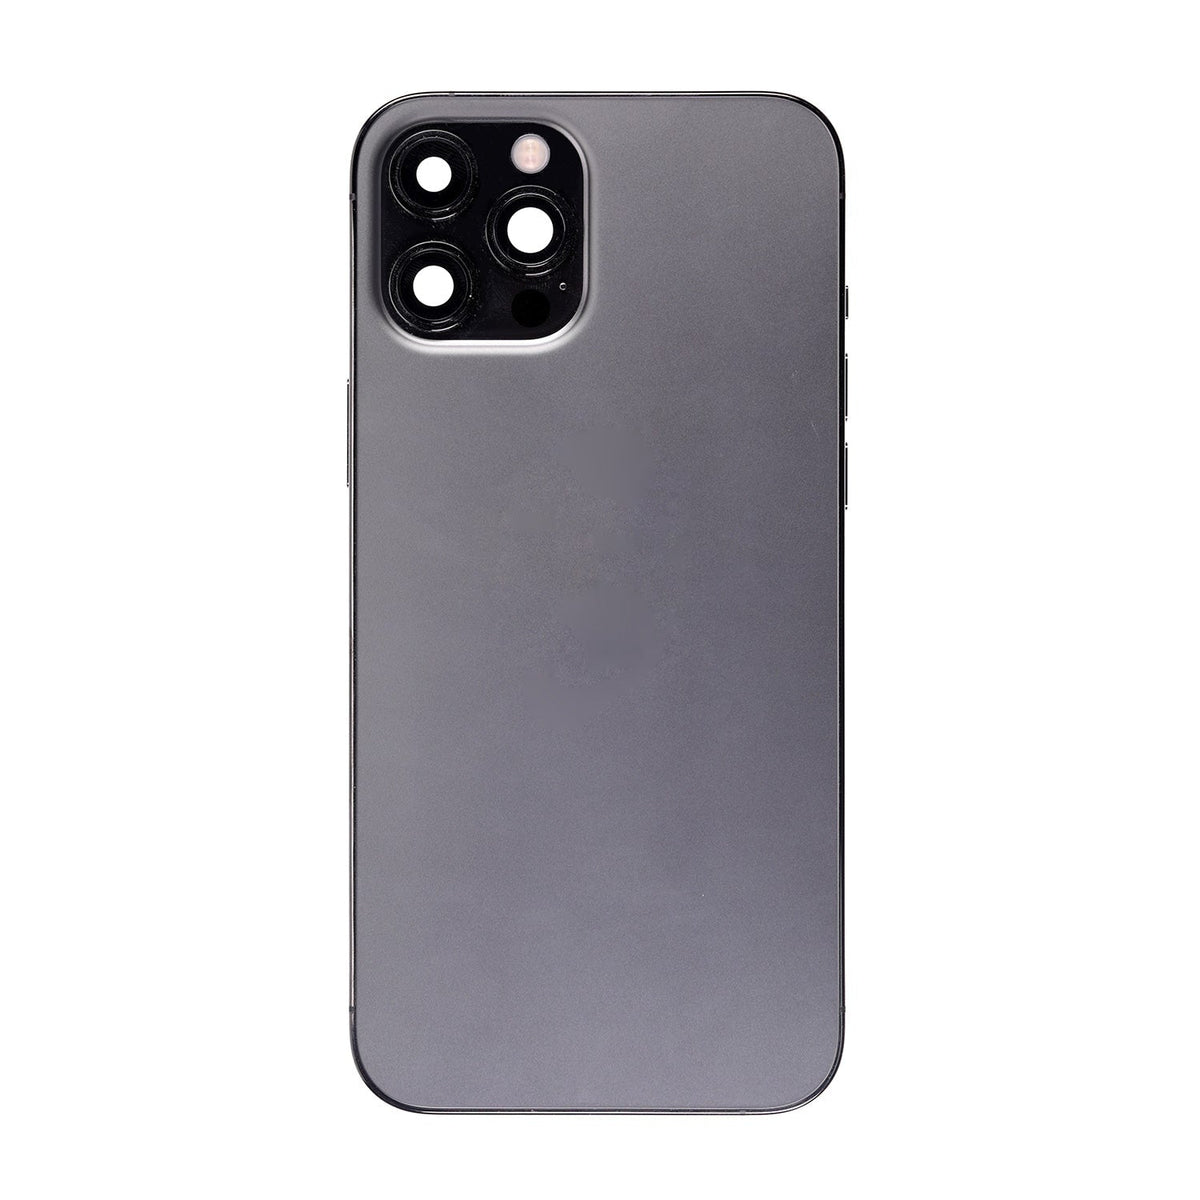 GRAPHITE BACK COVER FULL ASSEMBLY FOR IPHONE 12 PRO MAX